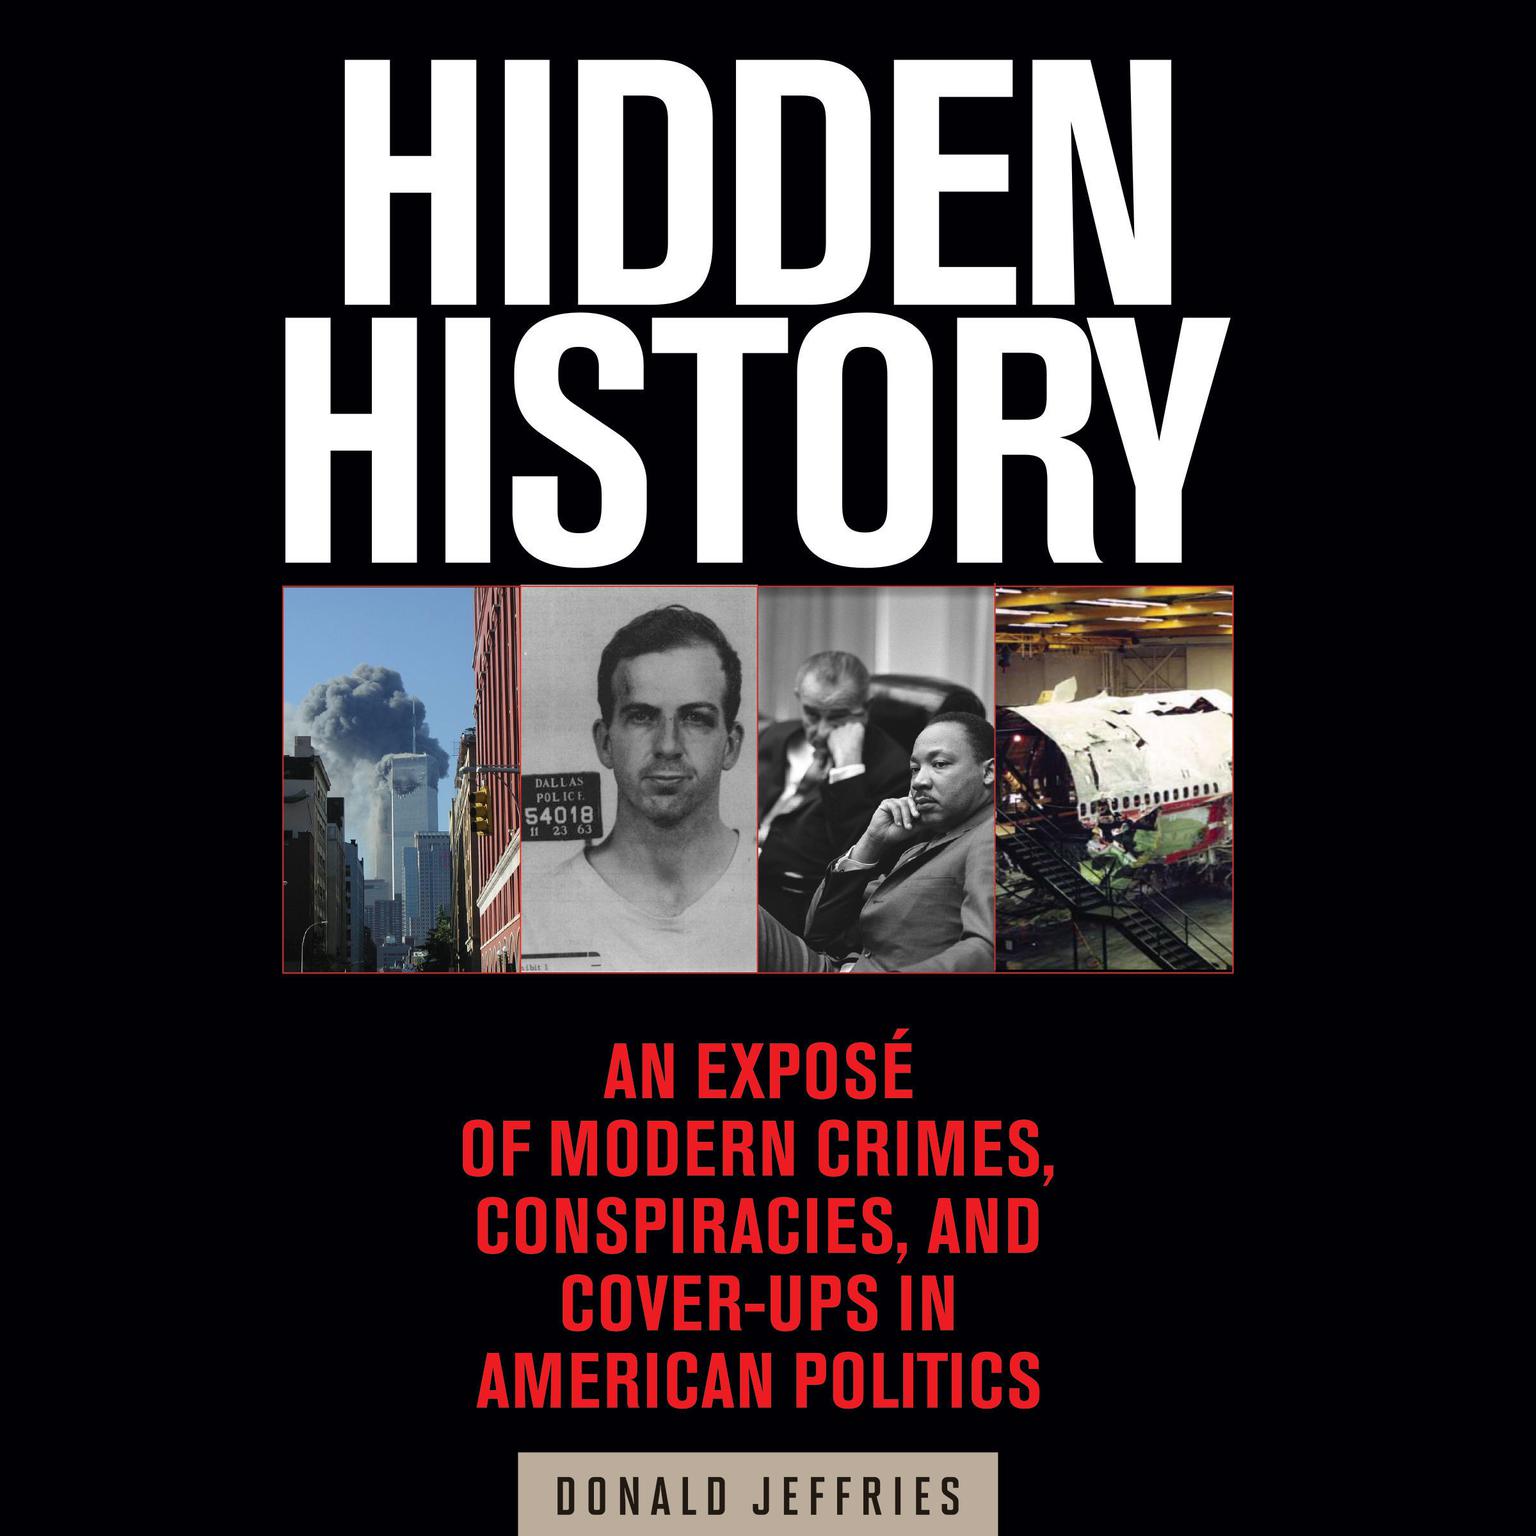 Hidden History: An Exposé of Modern Crimes, Conspiracies, and Cover-Ups in American Politics Audiobook, by Donald Jeffries